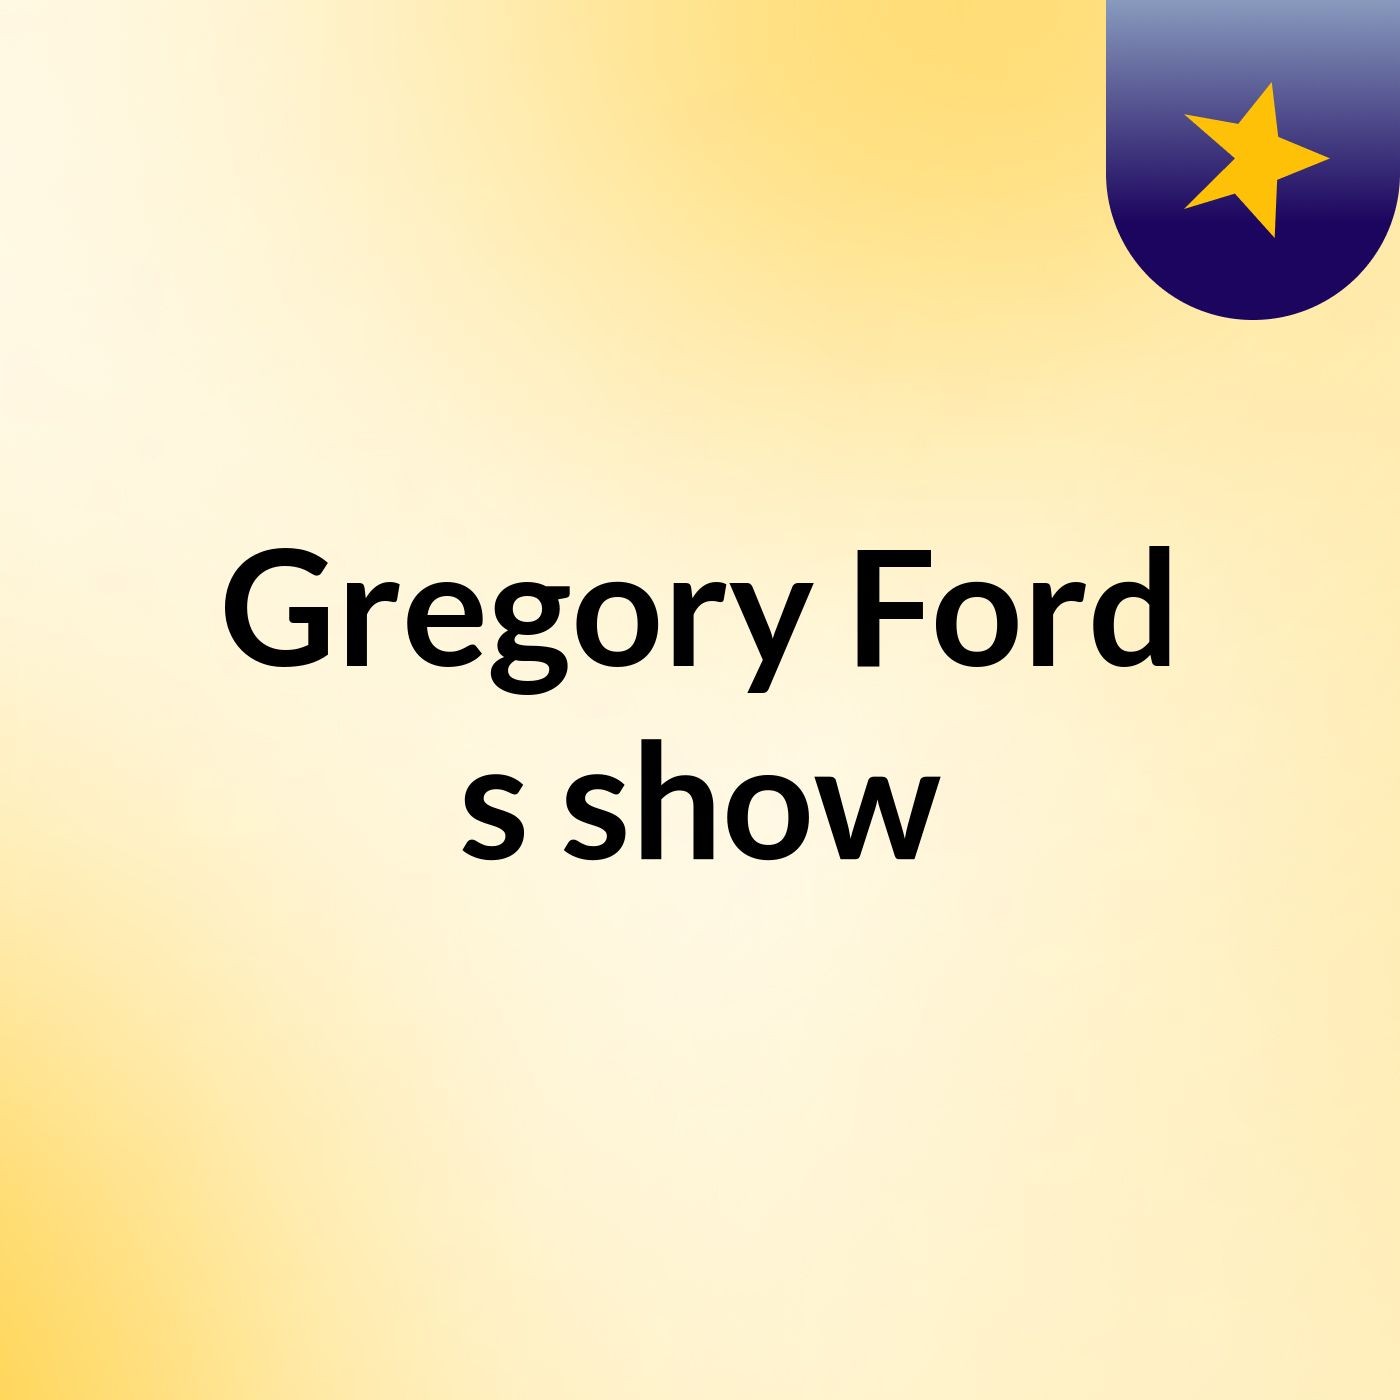 Episode 9 - Gregory Ford's show